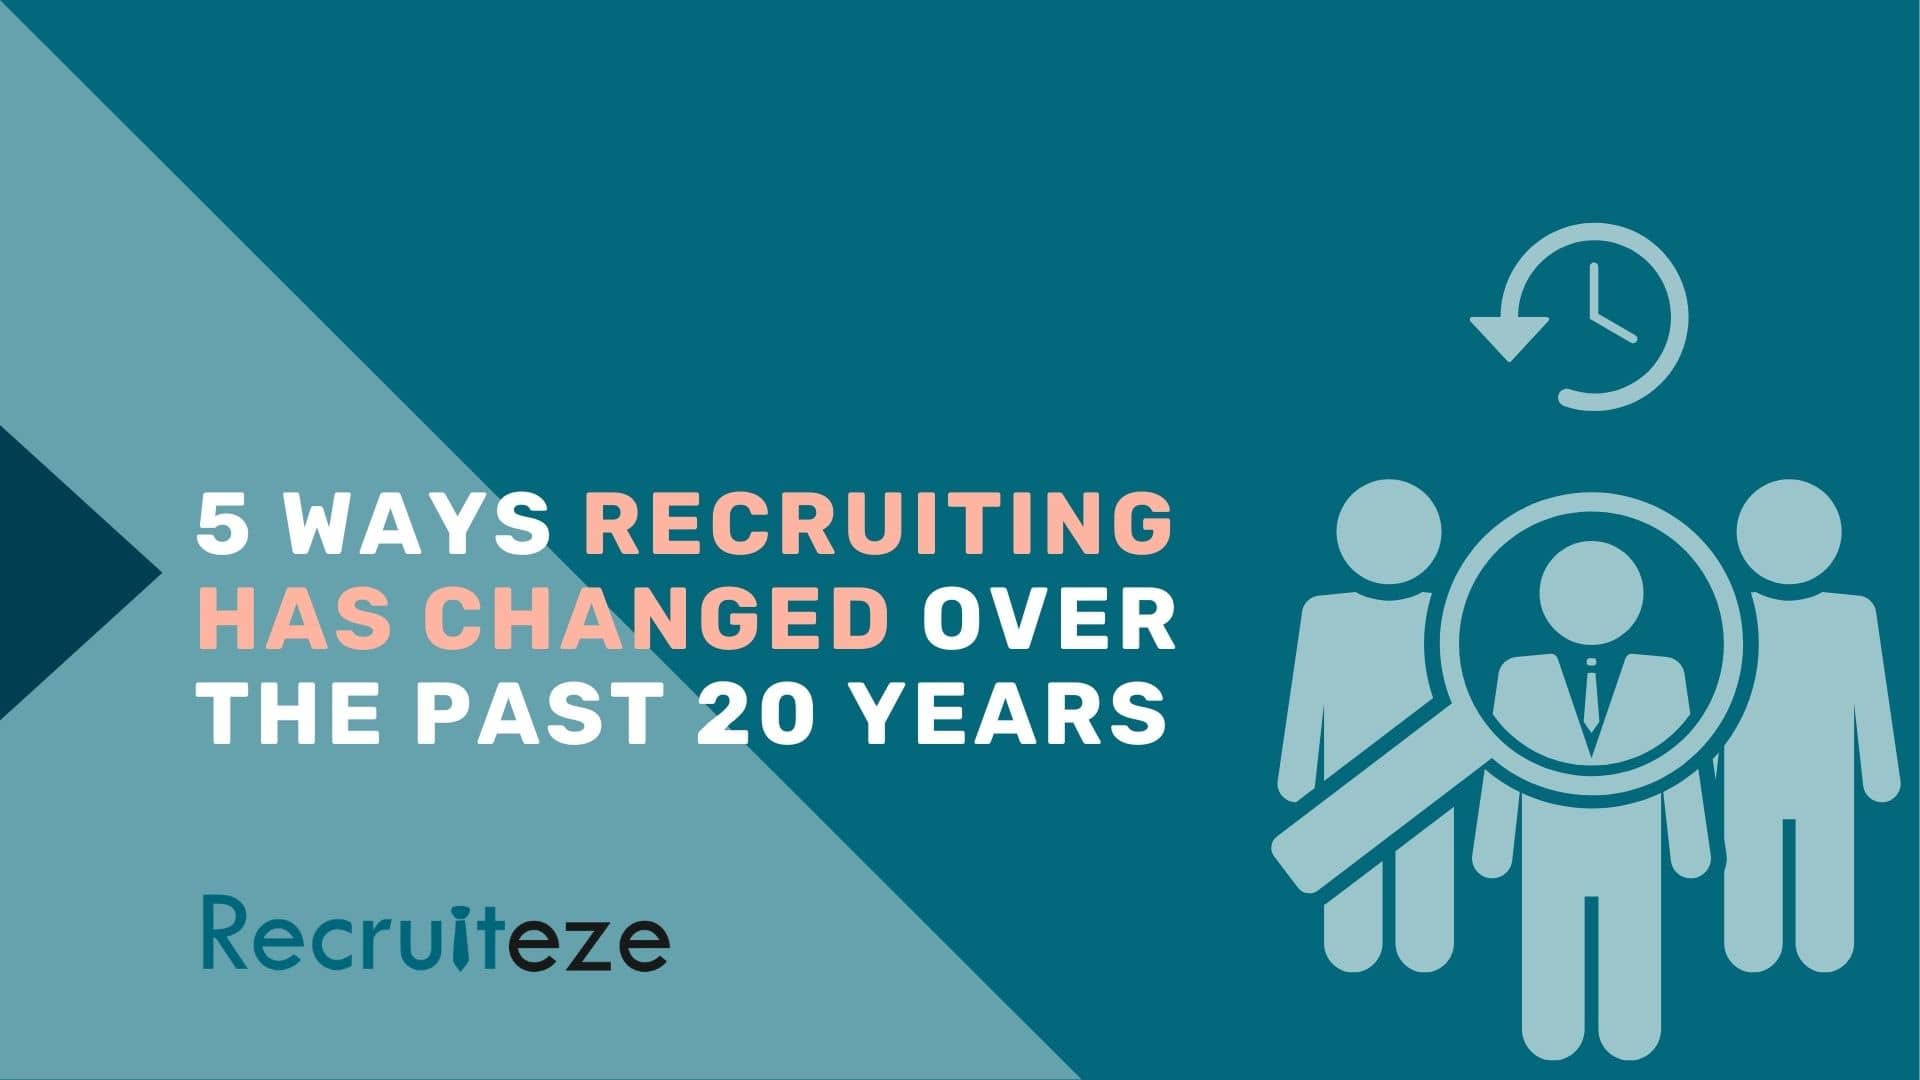 5 ways recruiting has changed over the past 20 years - Recruiteze